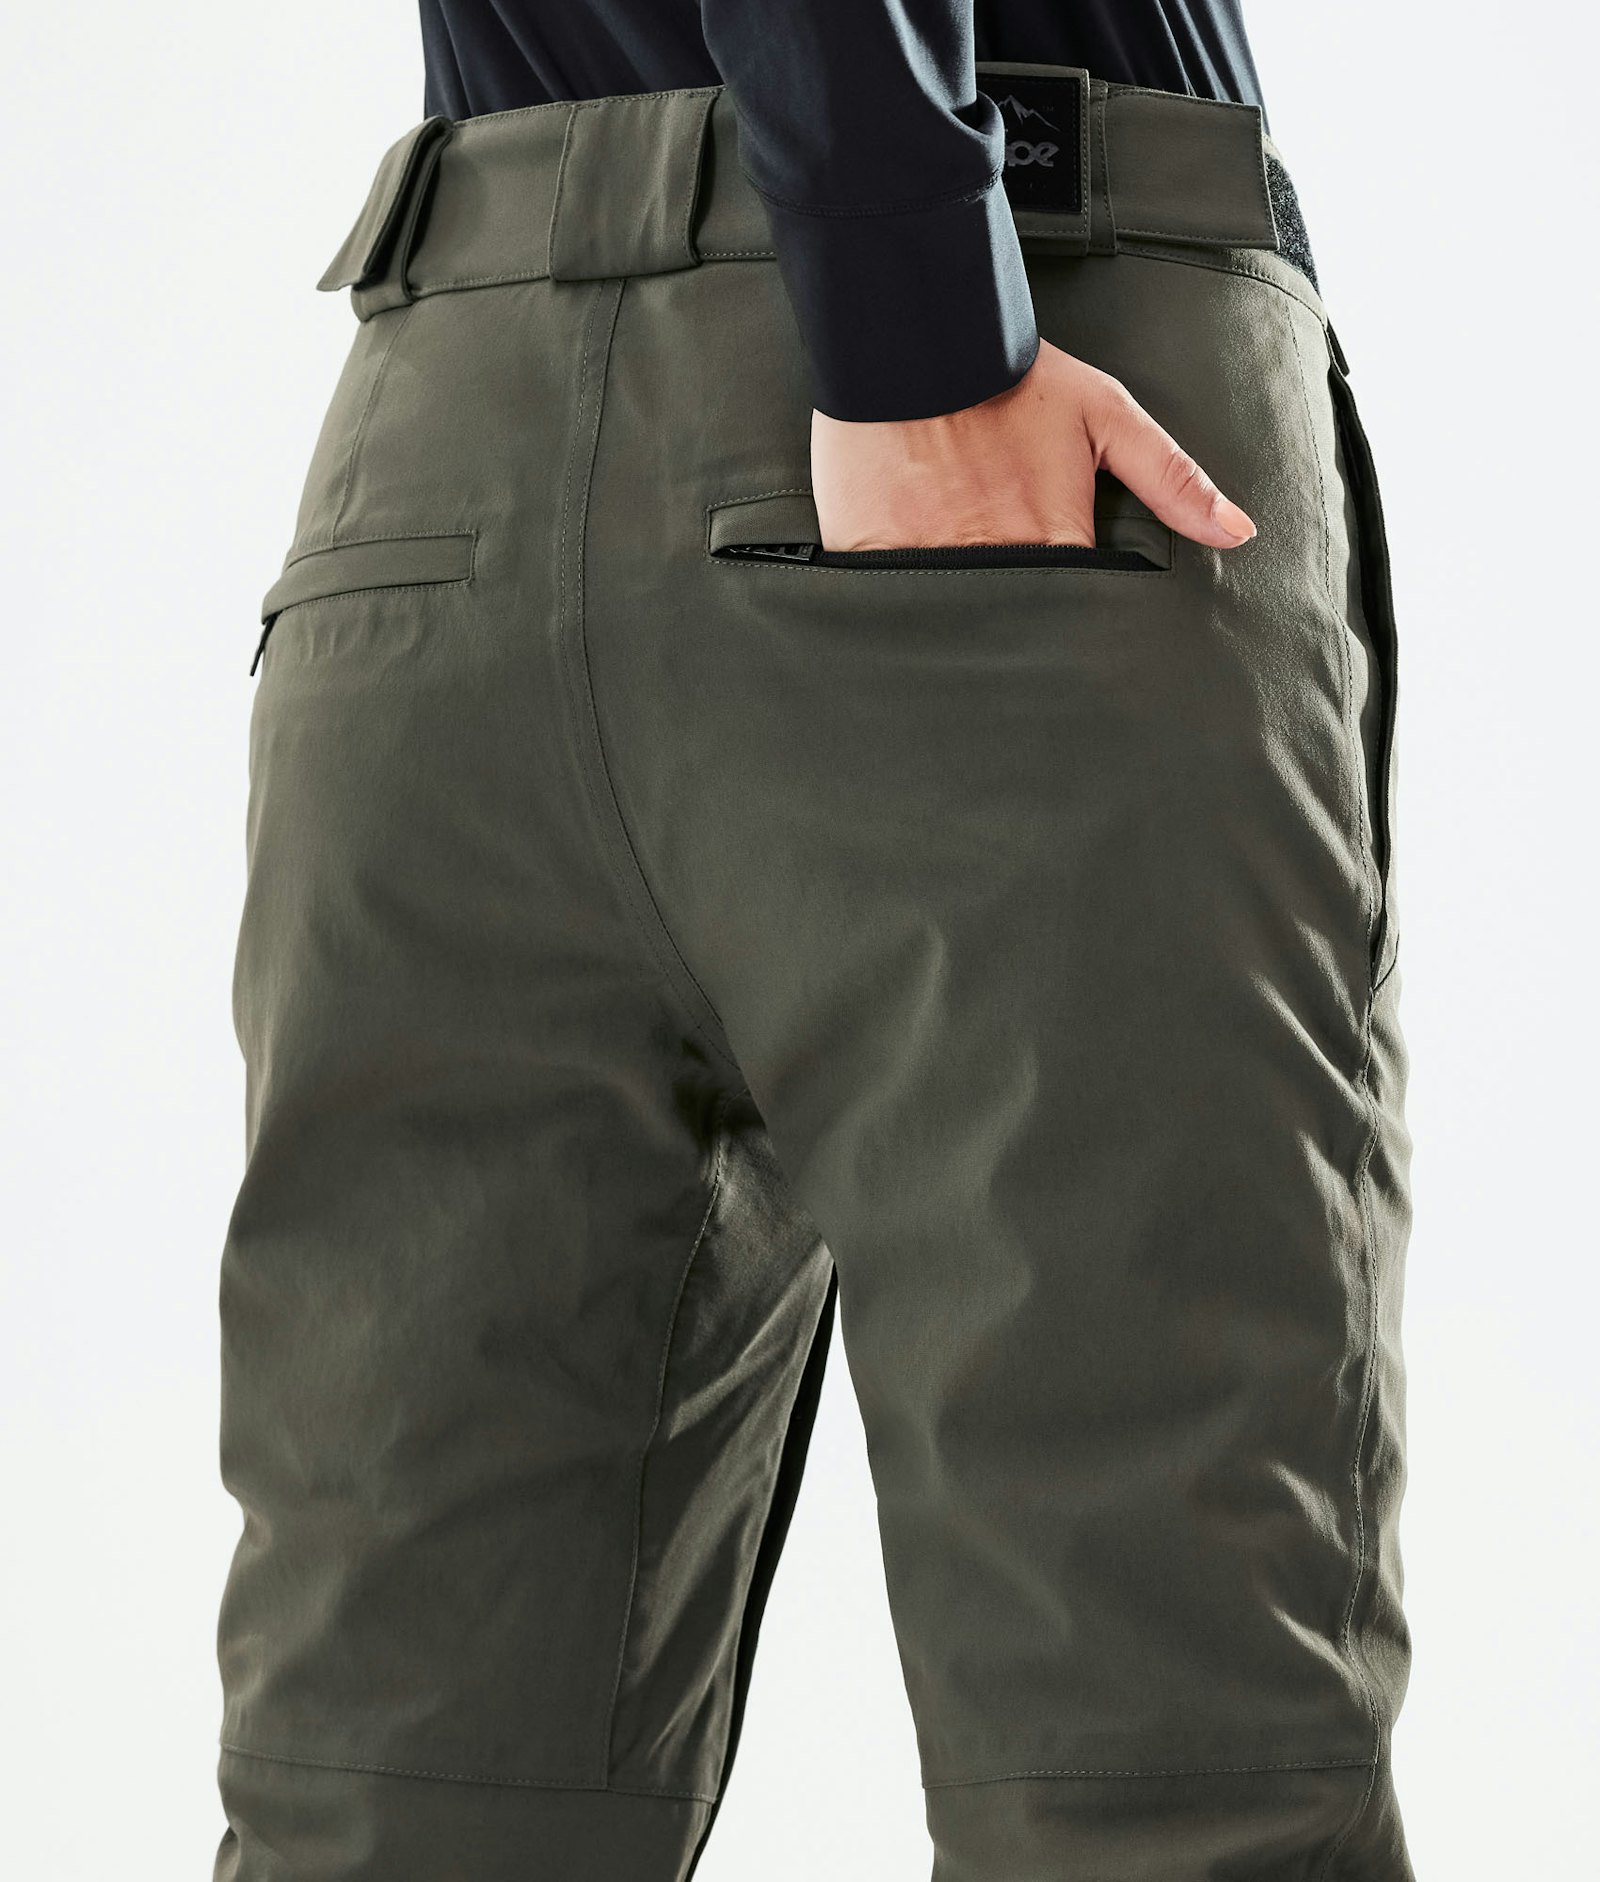 Dope Con W 2021 Snowboard Pants Women Olive Green Renewed, Image 5 of 5